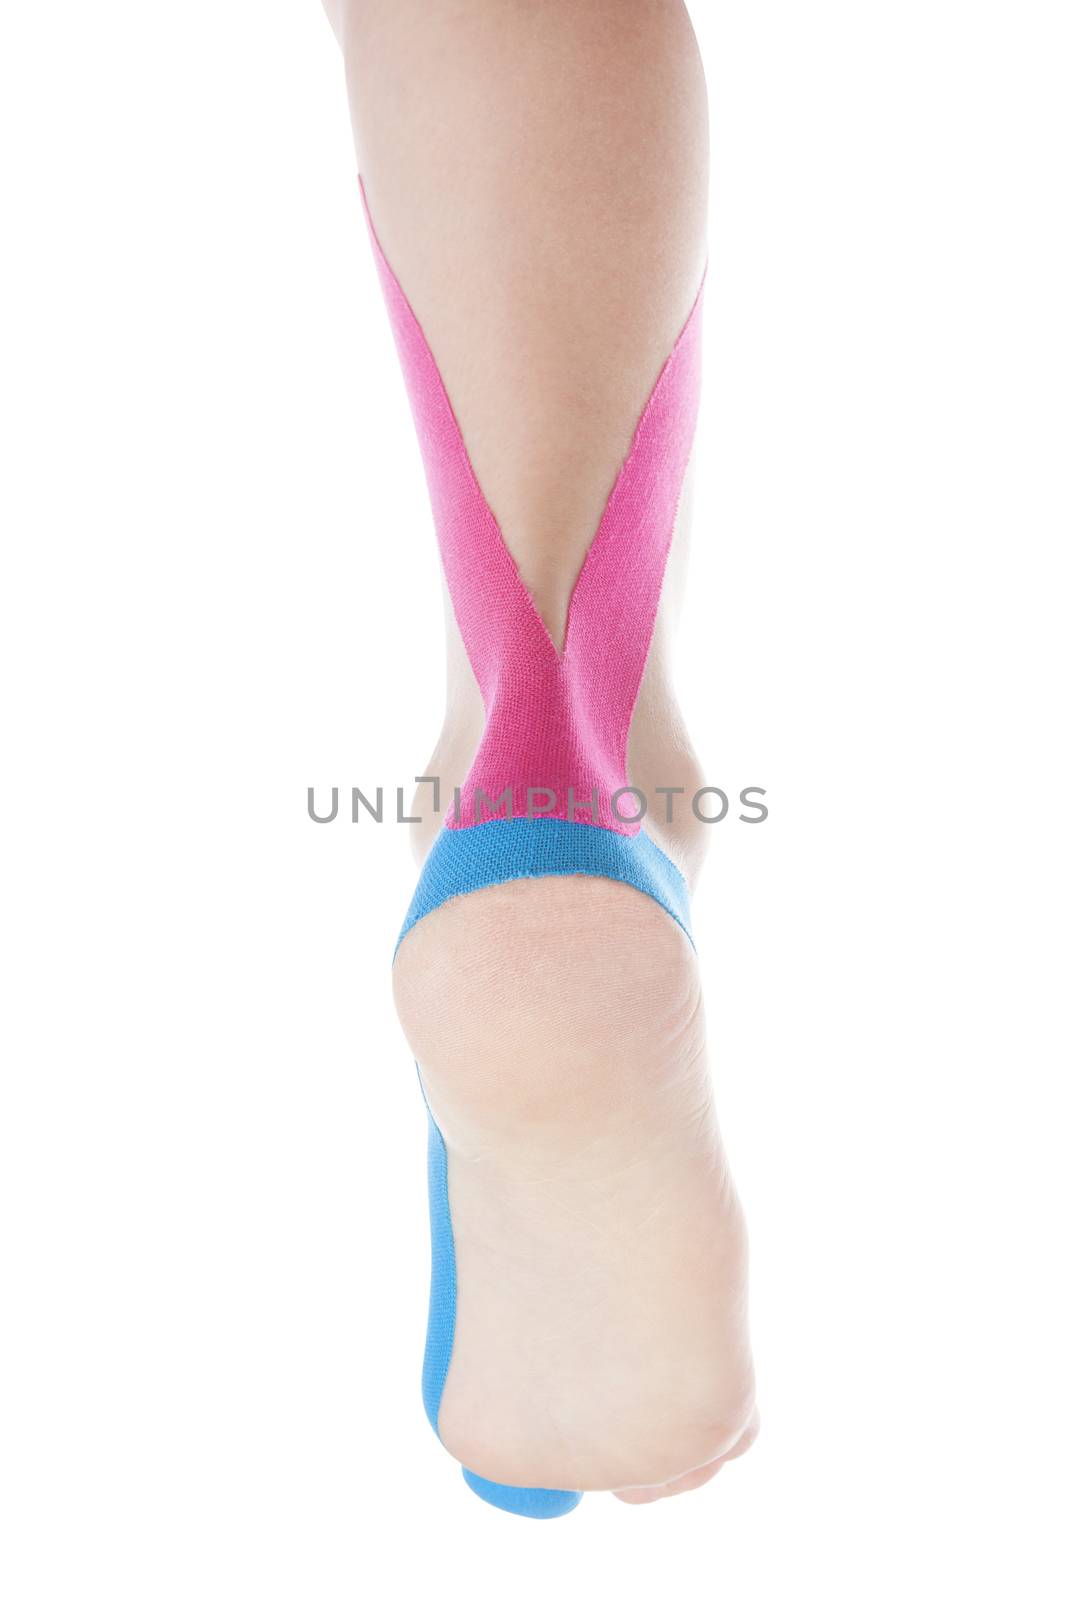 Therapeutic tape on female calf isolated on white background. Chronic pain, alternative medicine. Rehabilitation and physiotherapy. Calf pain.